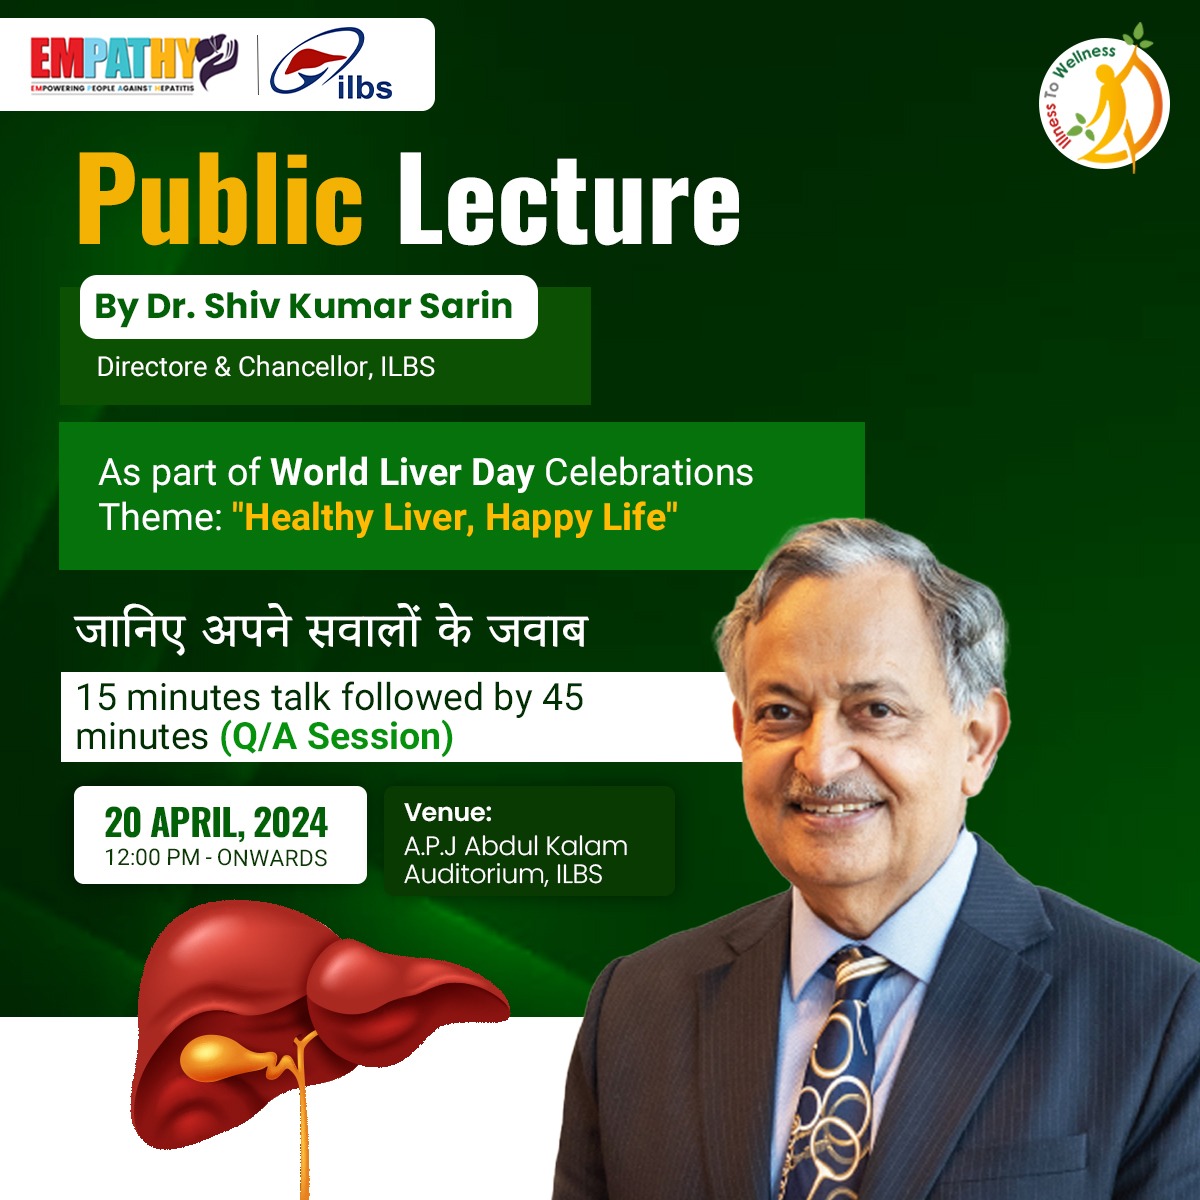 Empower Your Liver, Elevate Your Life: Join @drshivsarin Insightful Lecture on the theme #WorldLiverDay, April 20th, 2024, at @ILBS_india . #IllnessToWellness #theempathycampaign #LiverHealth #ILBS #Liver #FattyLiver